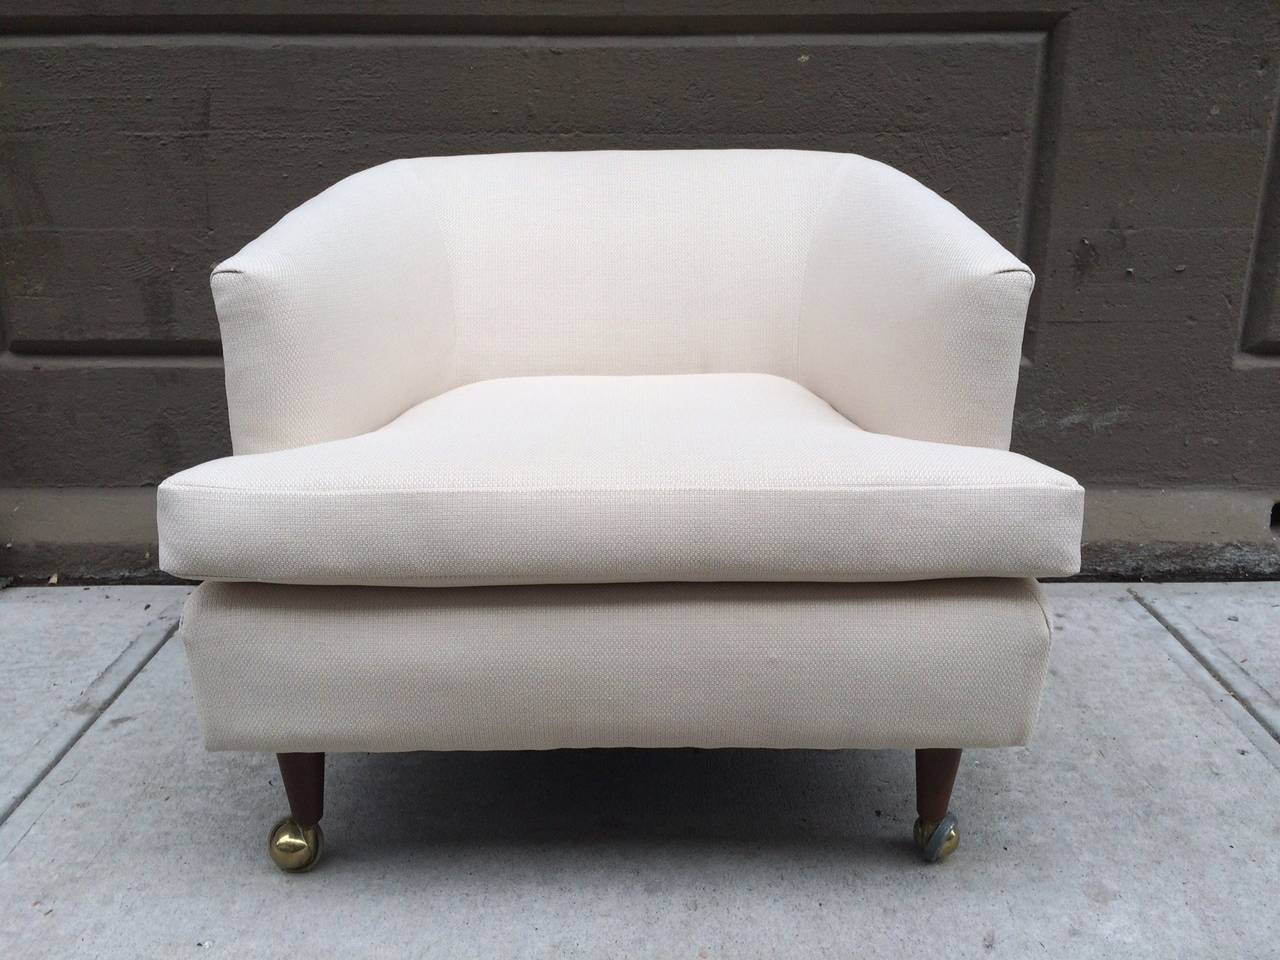 Pair of Kipp Stewart for Directional lounge chairs. Upholstered in linen. Legs are wood with casters.